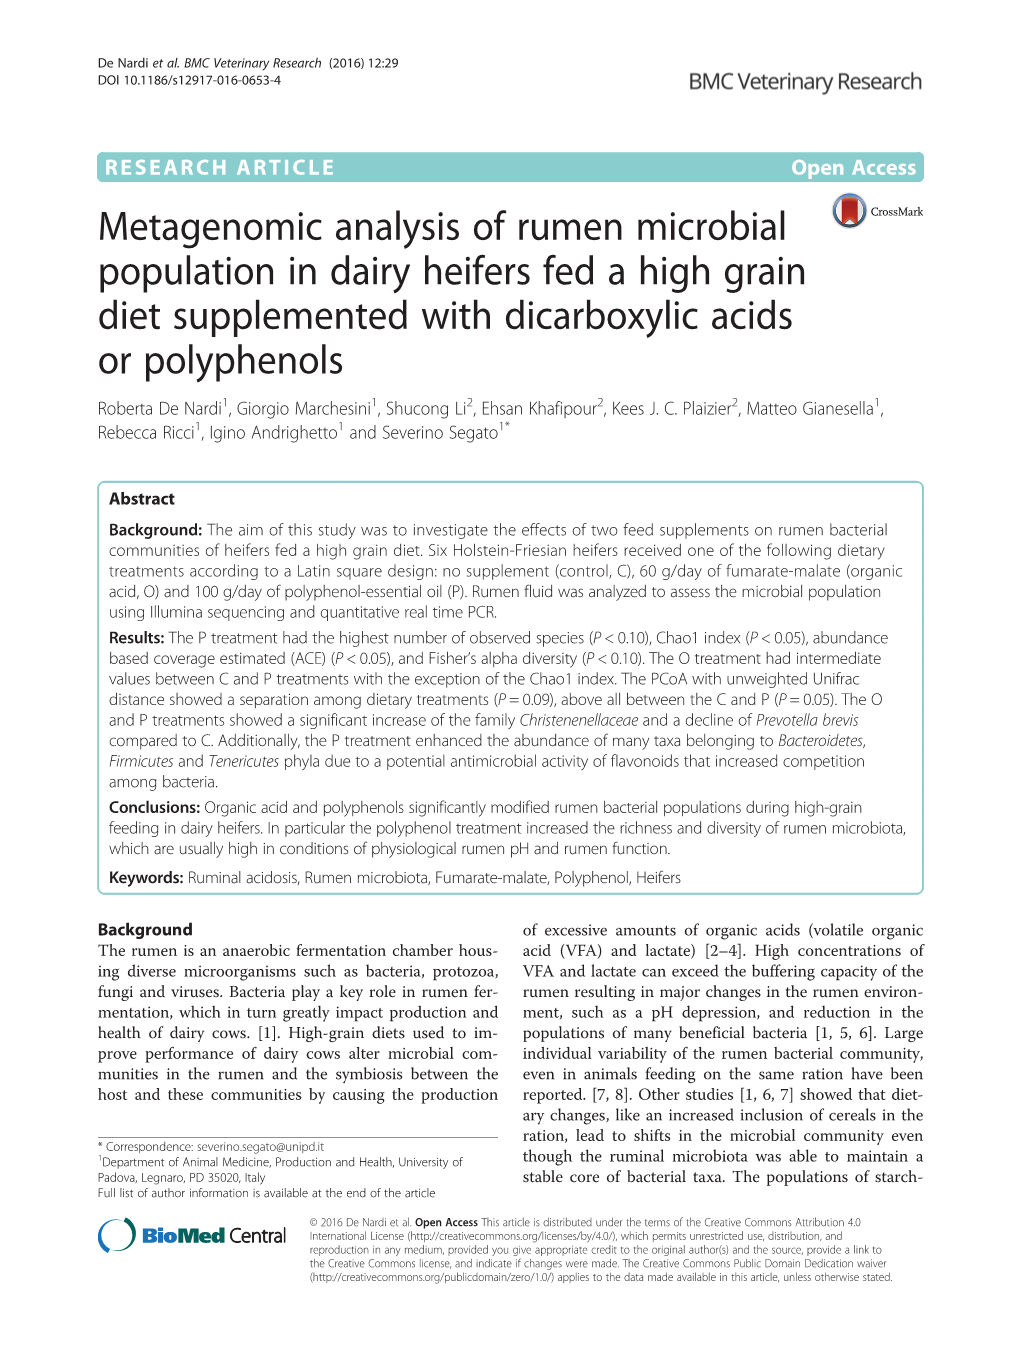 Metagenomic Analysis of Rumen Microbial Population in Dairy Heifers Fed a High Grain Diet Supplemented with Dicarboxylic Acids O